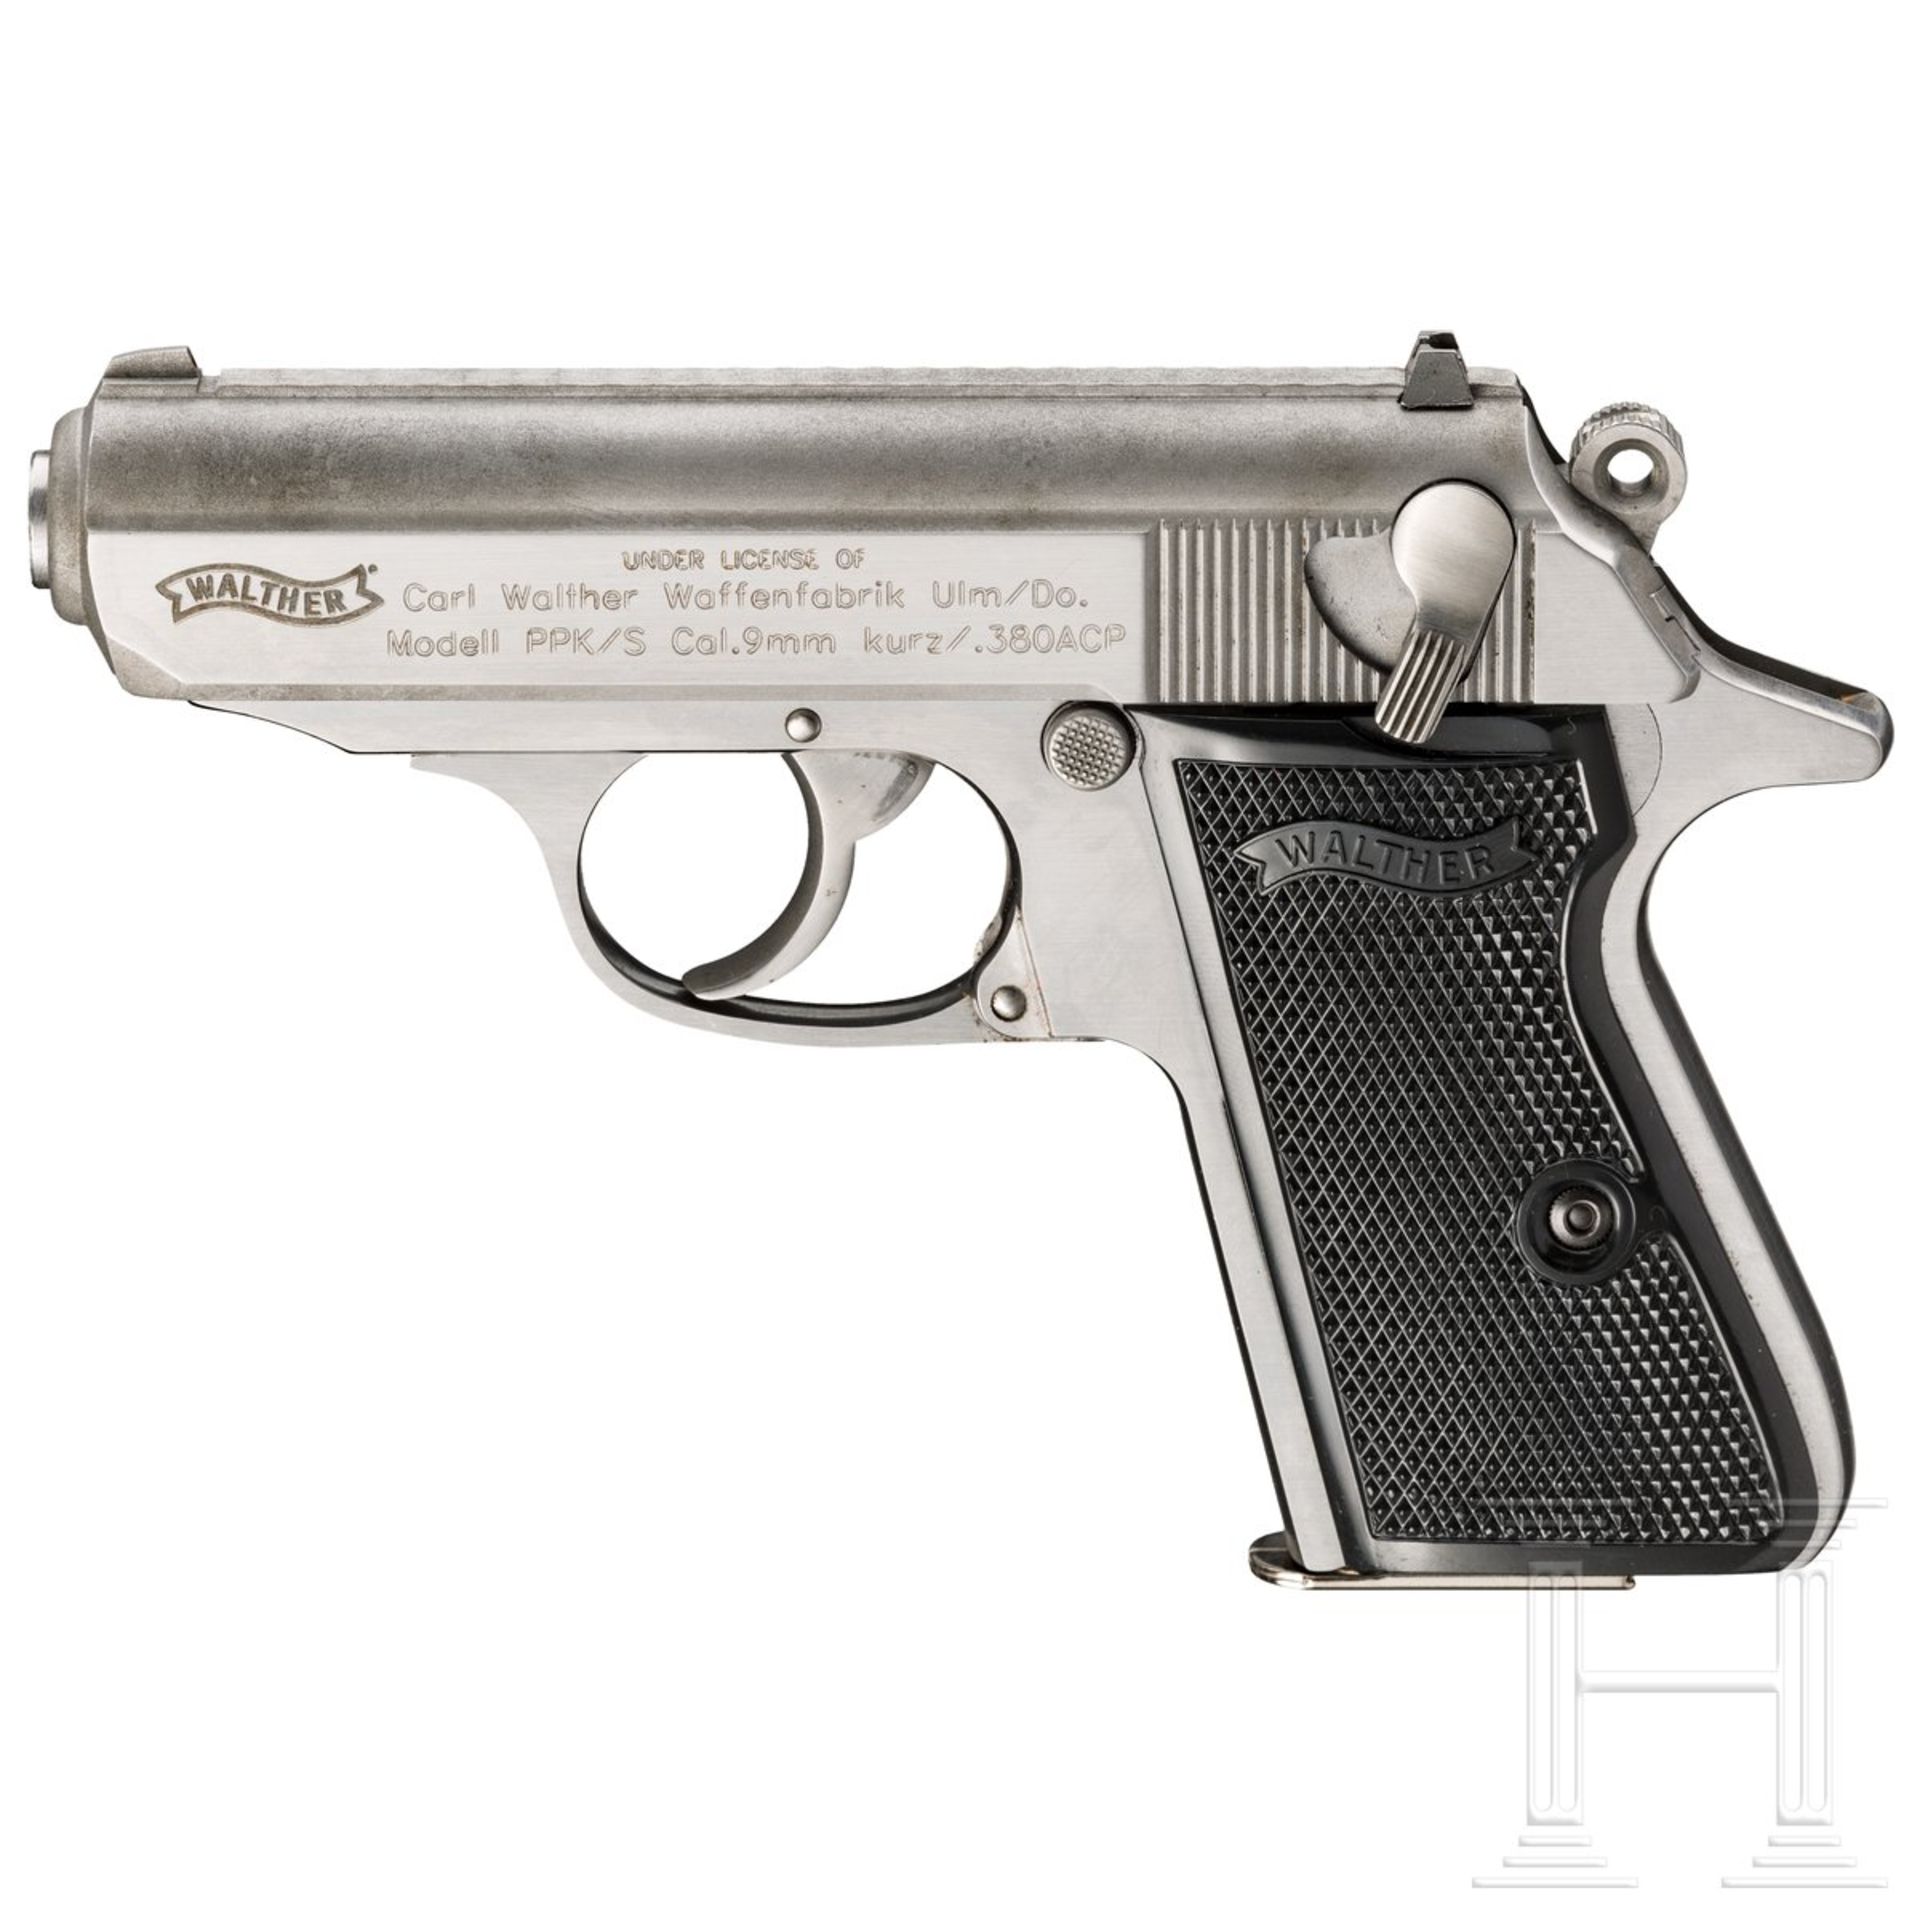 Walther PPK/S, Smith & Wesson, stainless, 4mm M20 Umbau